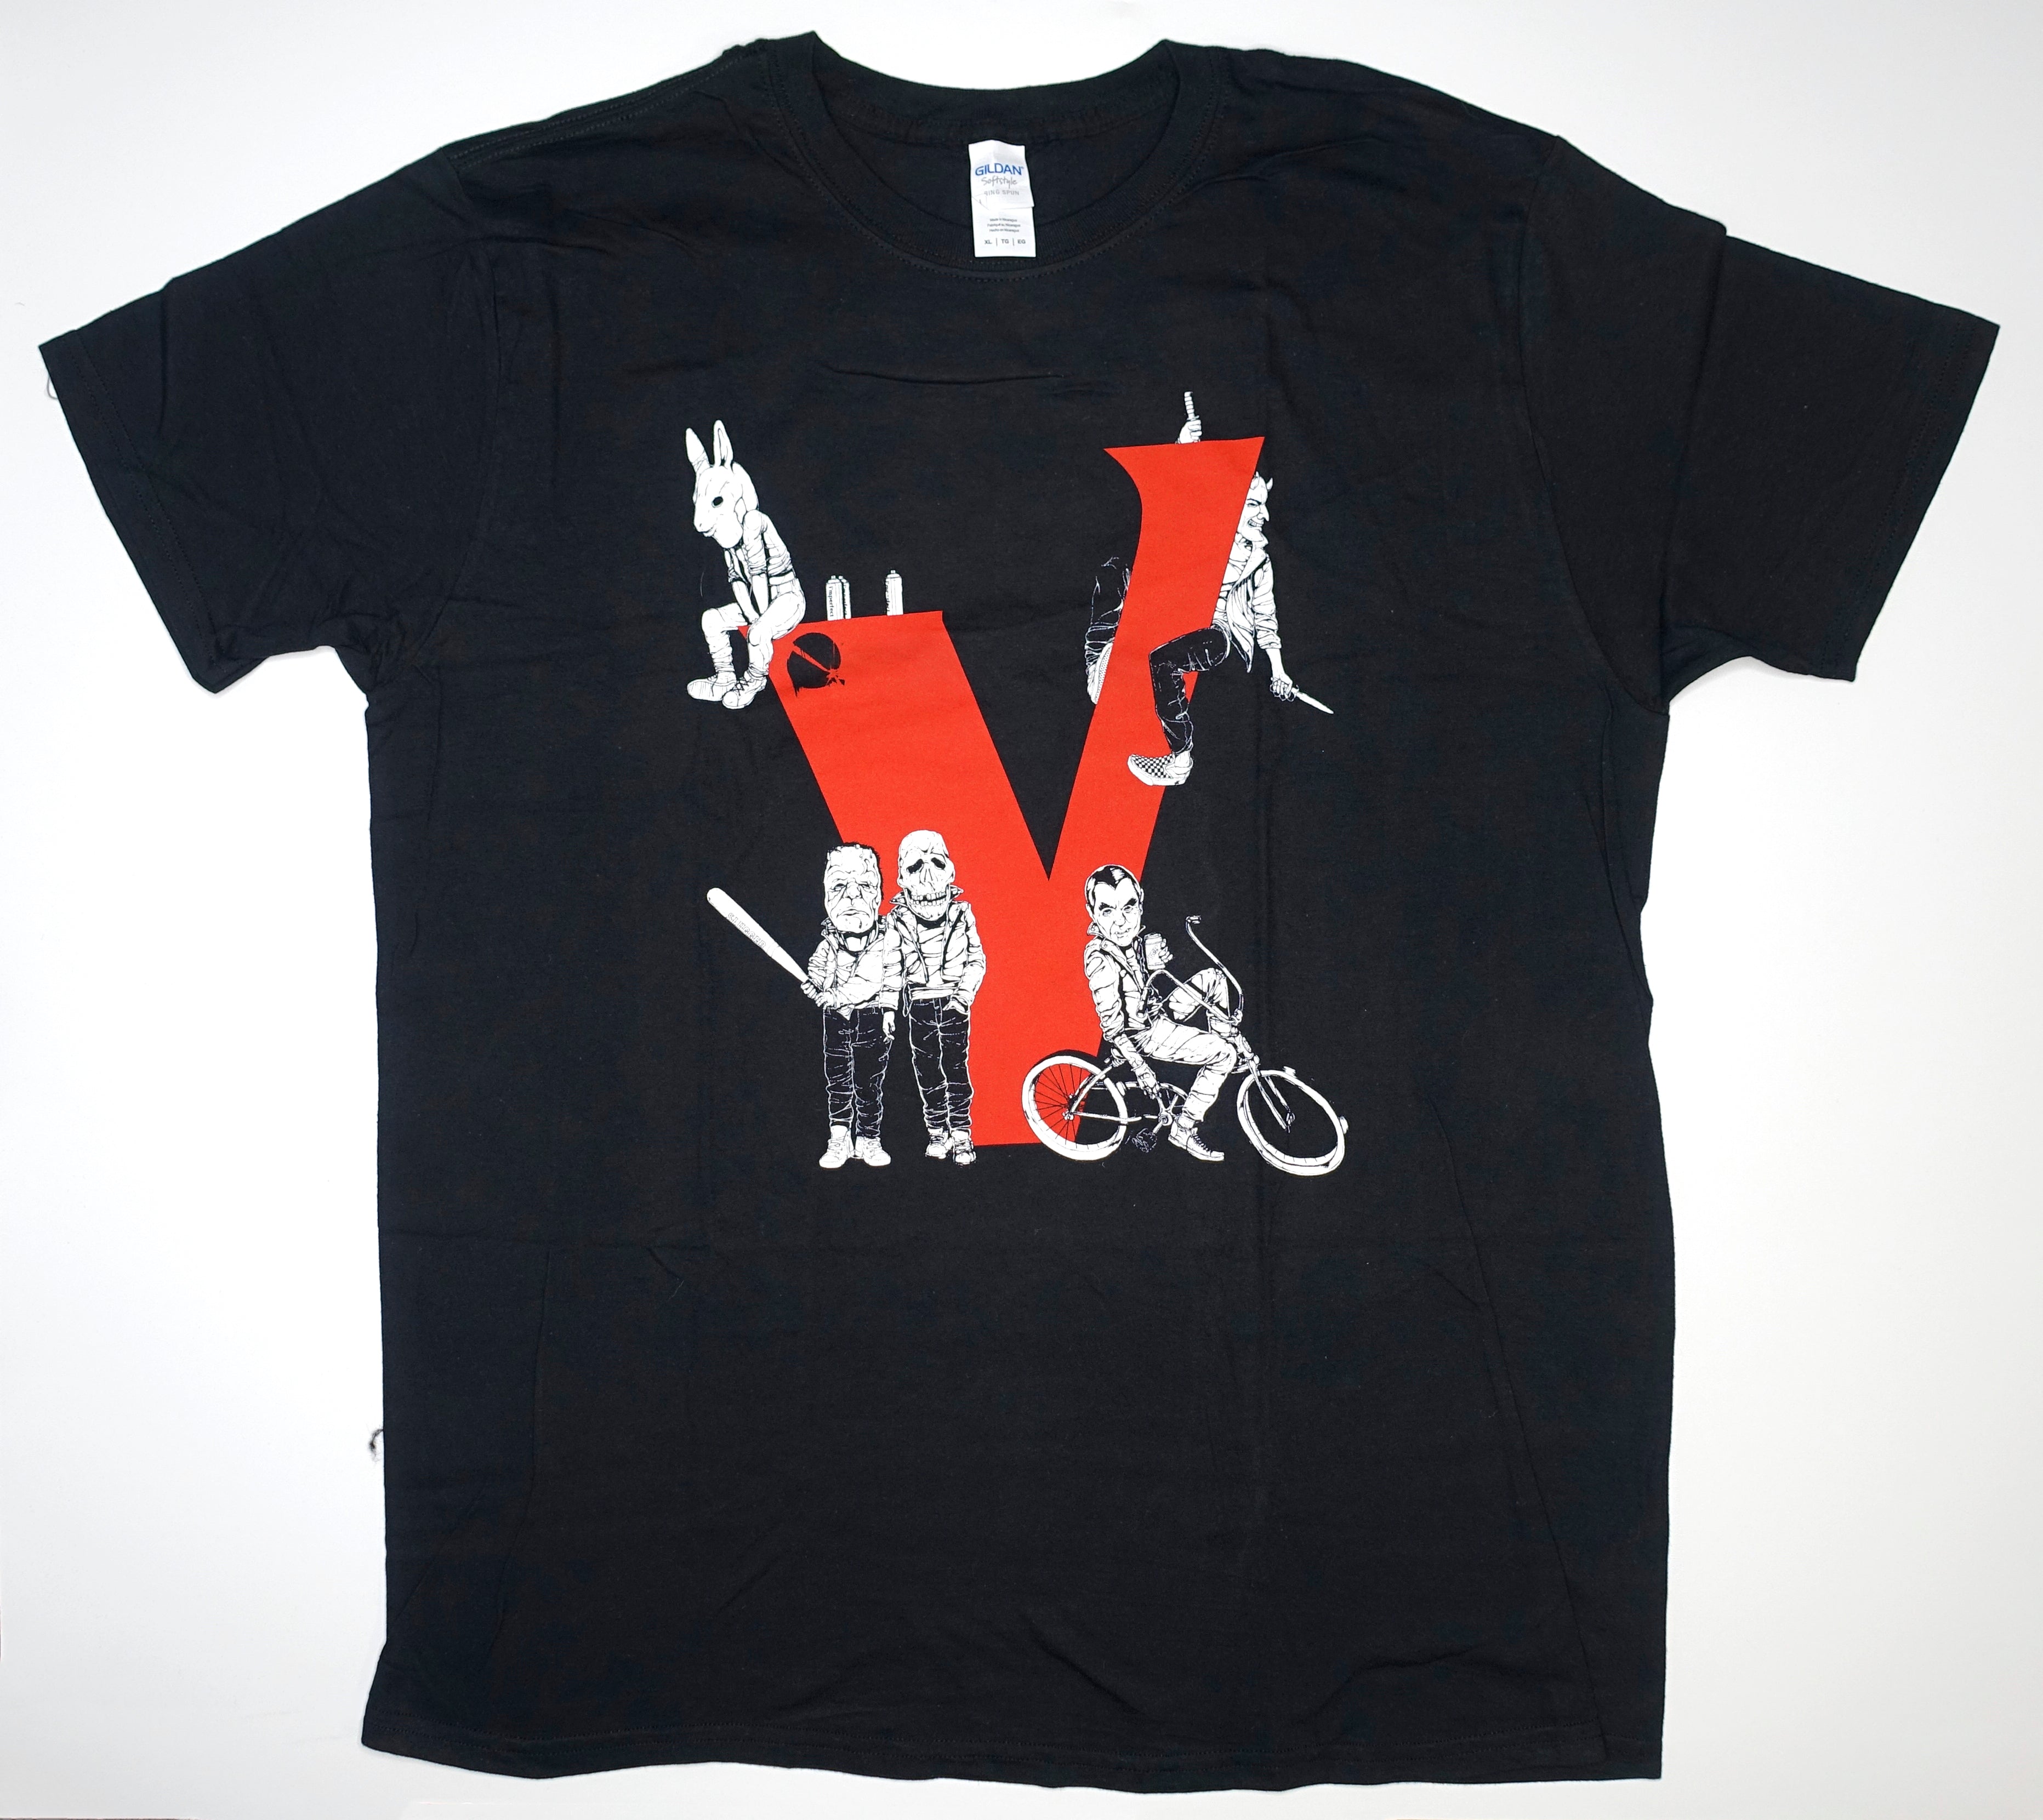 Queens Of The Stone Age – V for Villians 2017 Tour Shirt Size XL